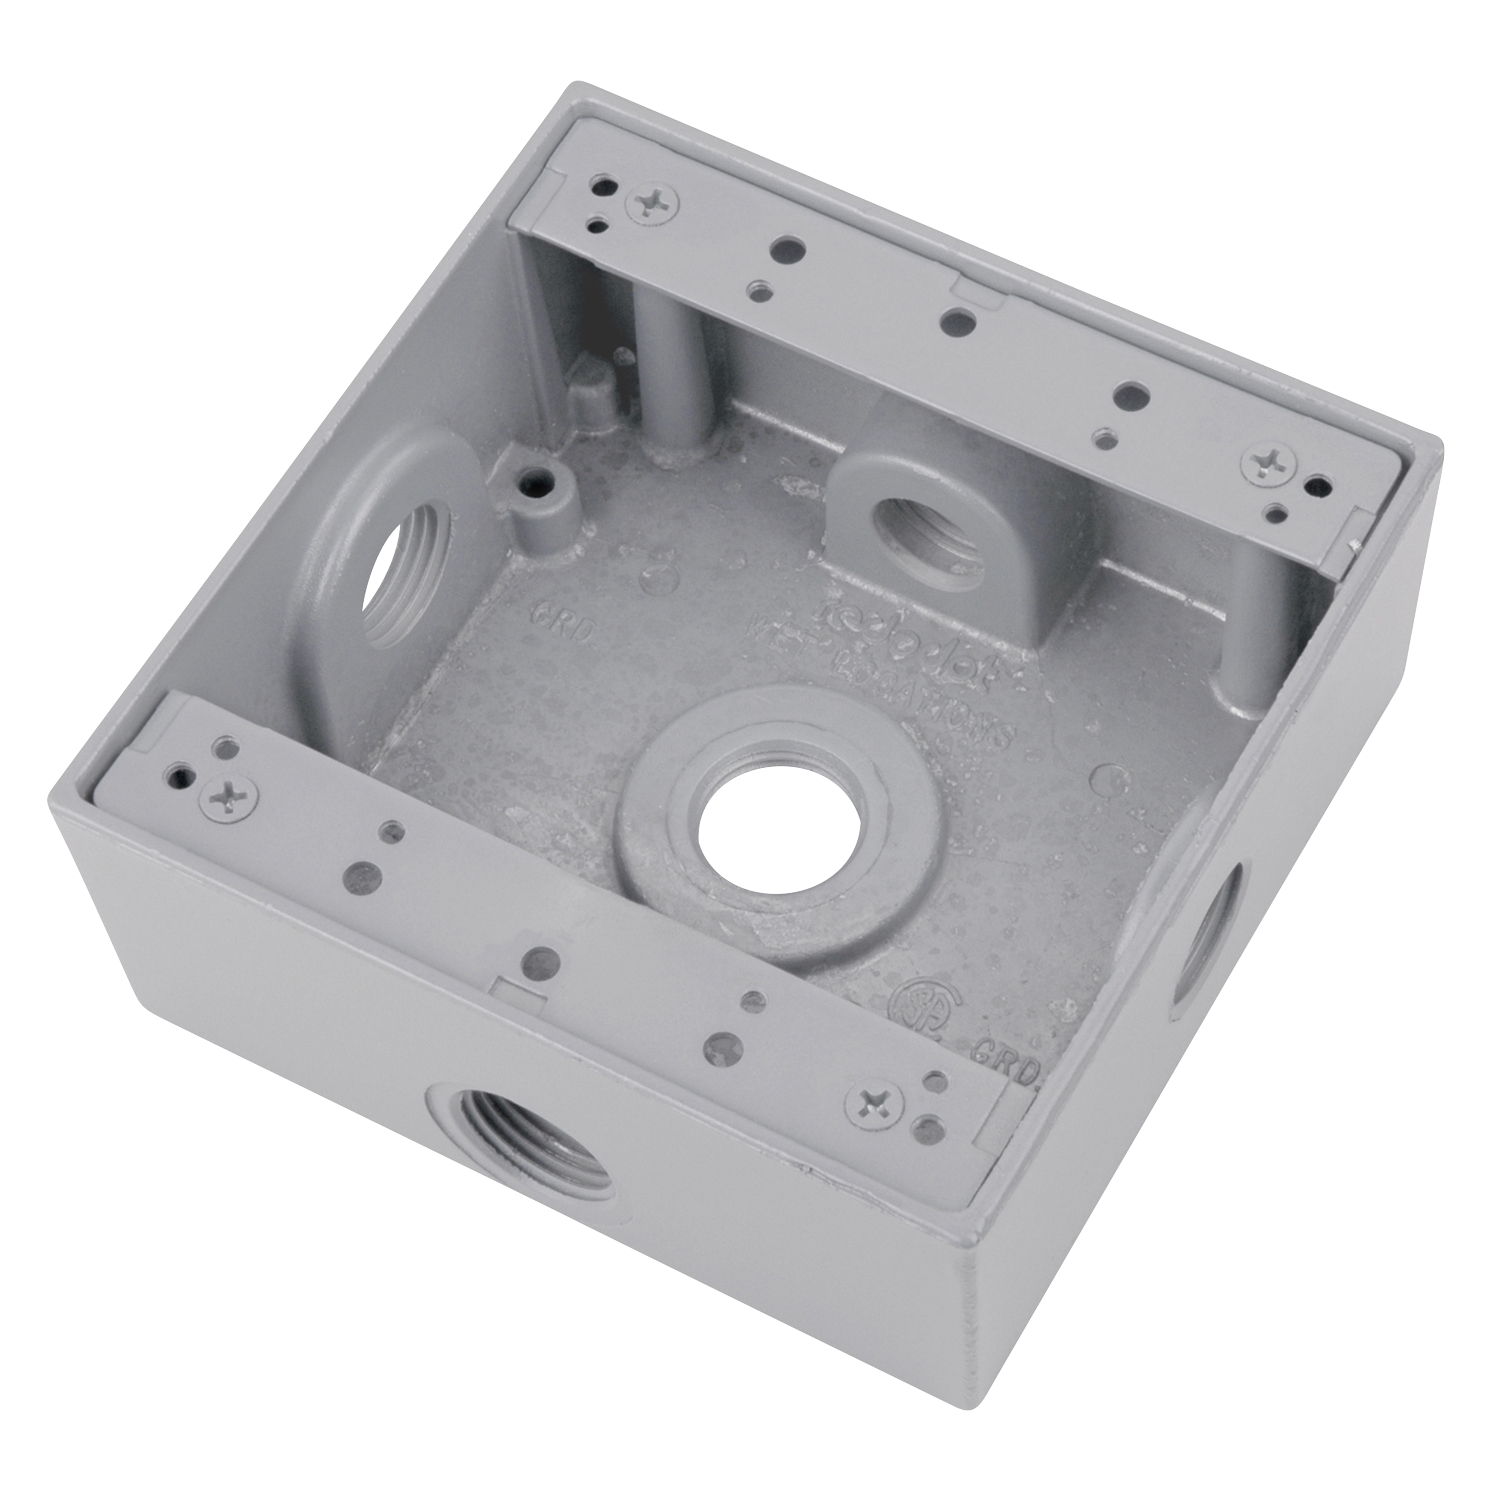 2IH5S2-1 Weatherproof Outlet Box Red Dot;ABB - Installation Products